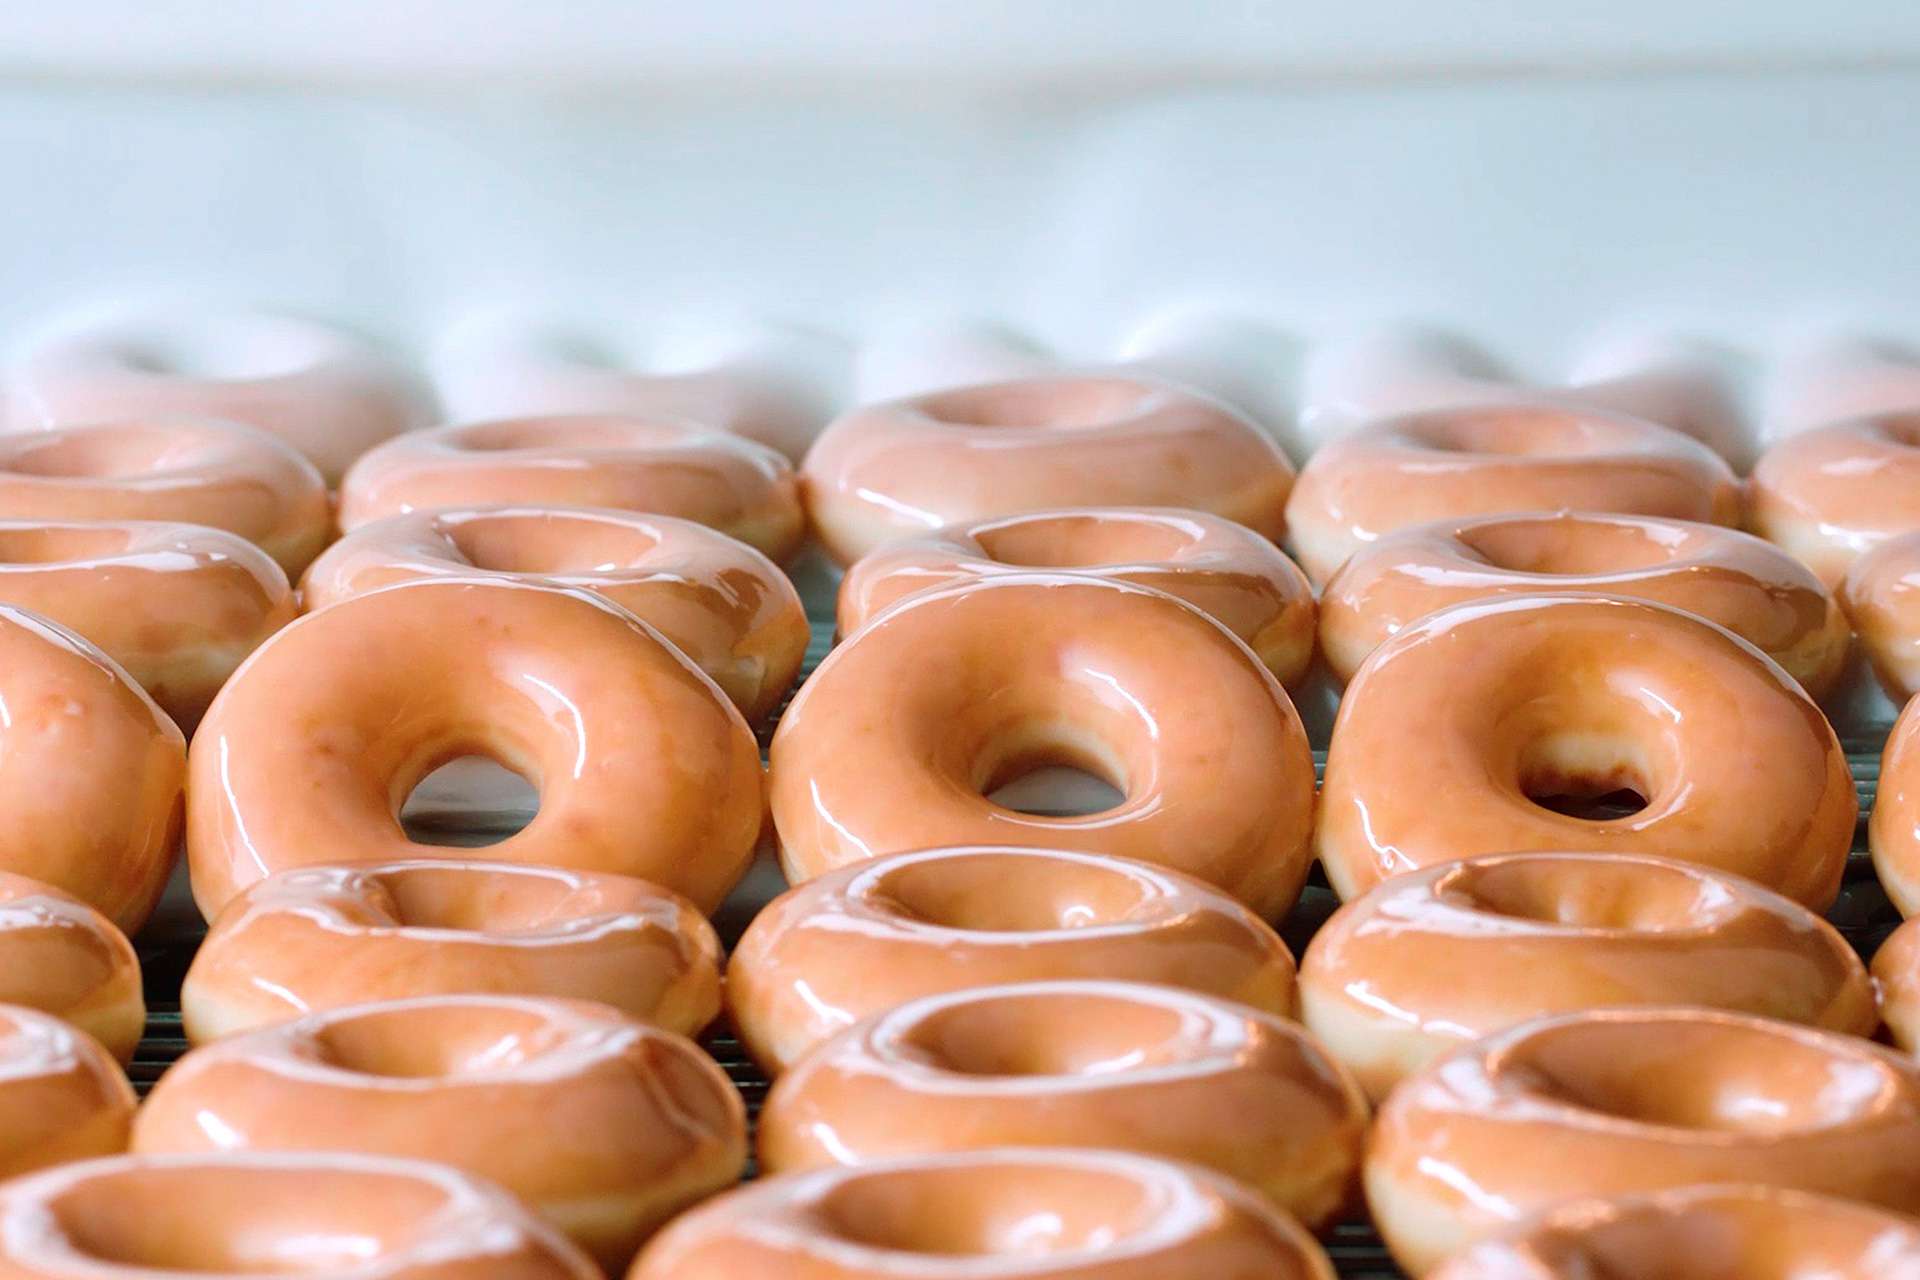 krispy kreme is selling a dozen donuts for $1 on tuesday